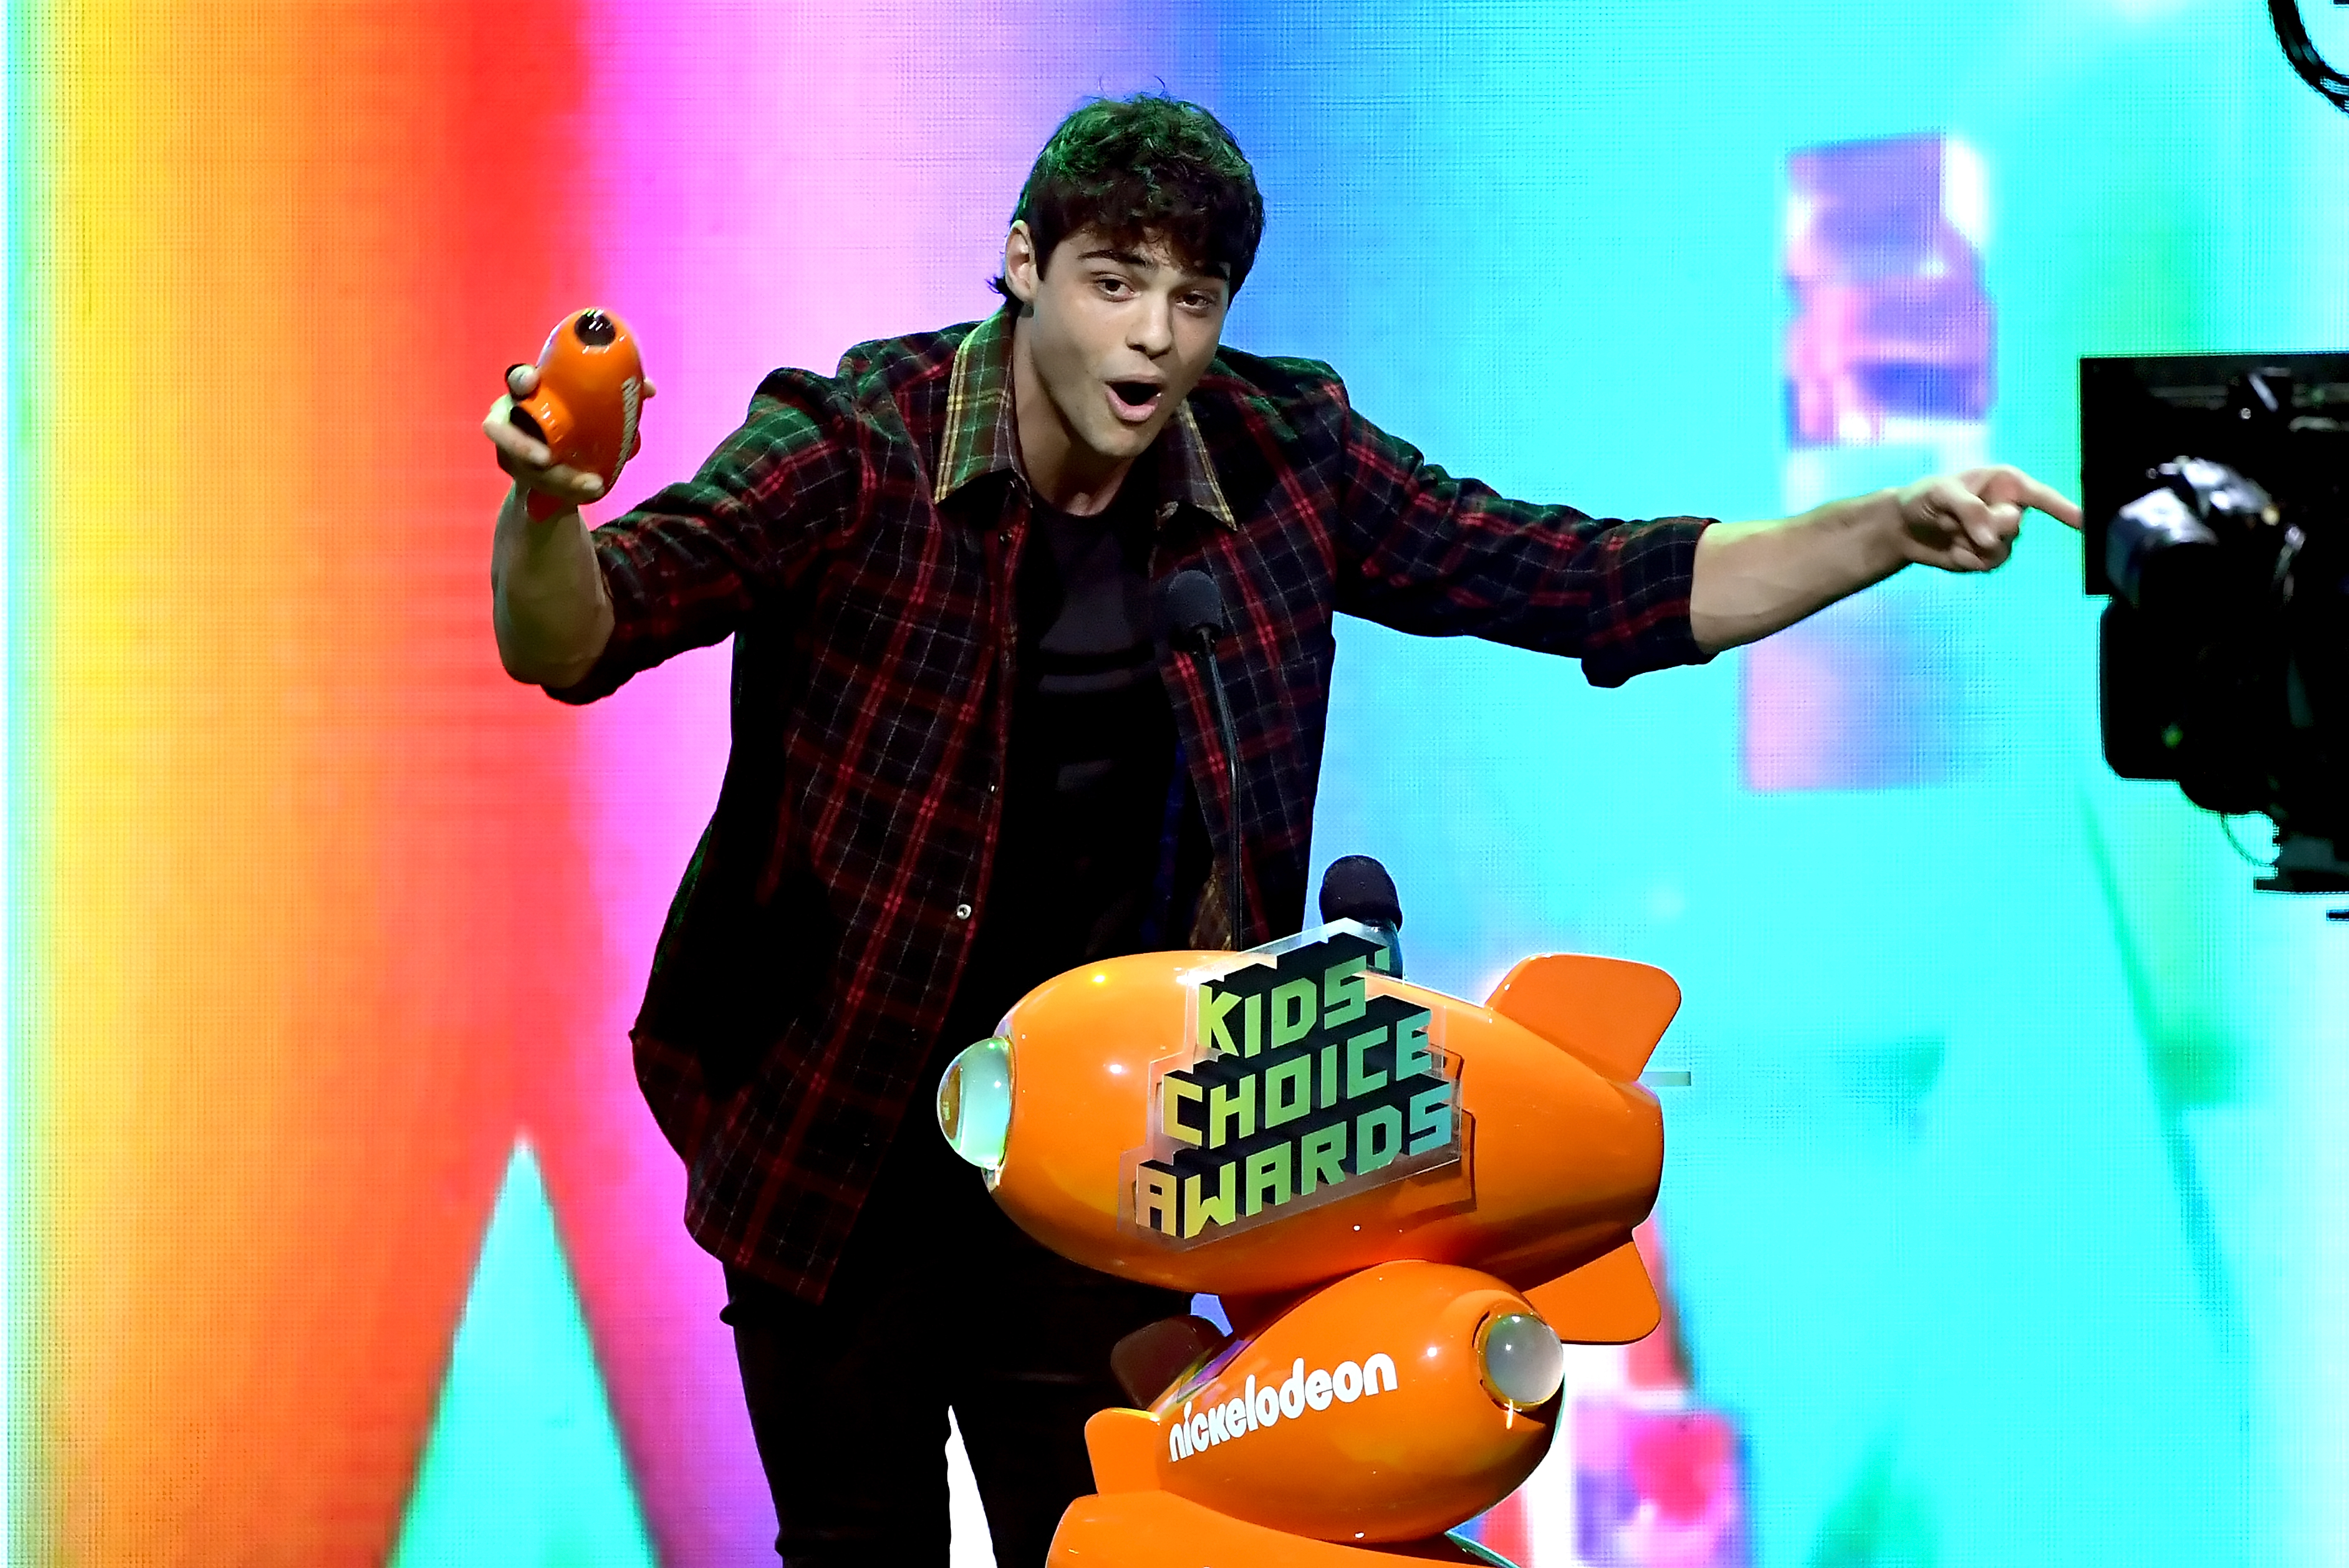 LOS ANGELES, CA - MARCH 23: Noah Centineo accepts the Favorite Movie Actor award for 'To All the Boys I've Loved Before' onstage at Nickelodeon's 2019 Kids' Choice Awards at Galen Center on March 23, 2019 in Los Angeles, California. (Photo by Kevin Winter/Getty Images)